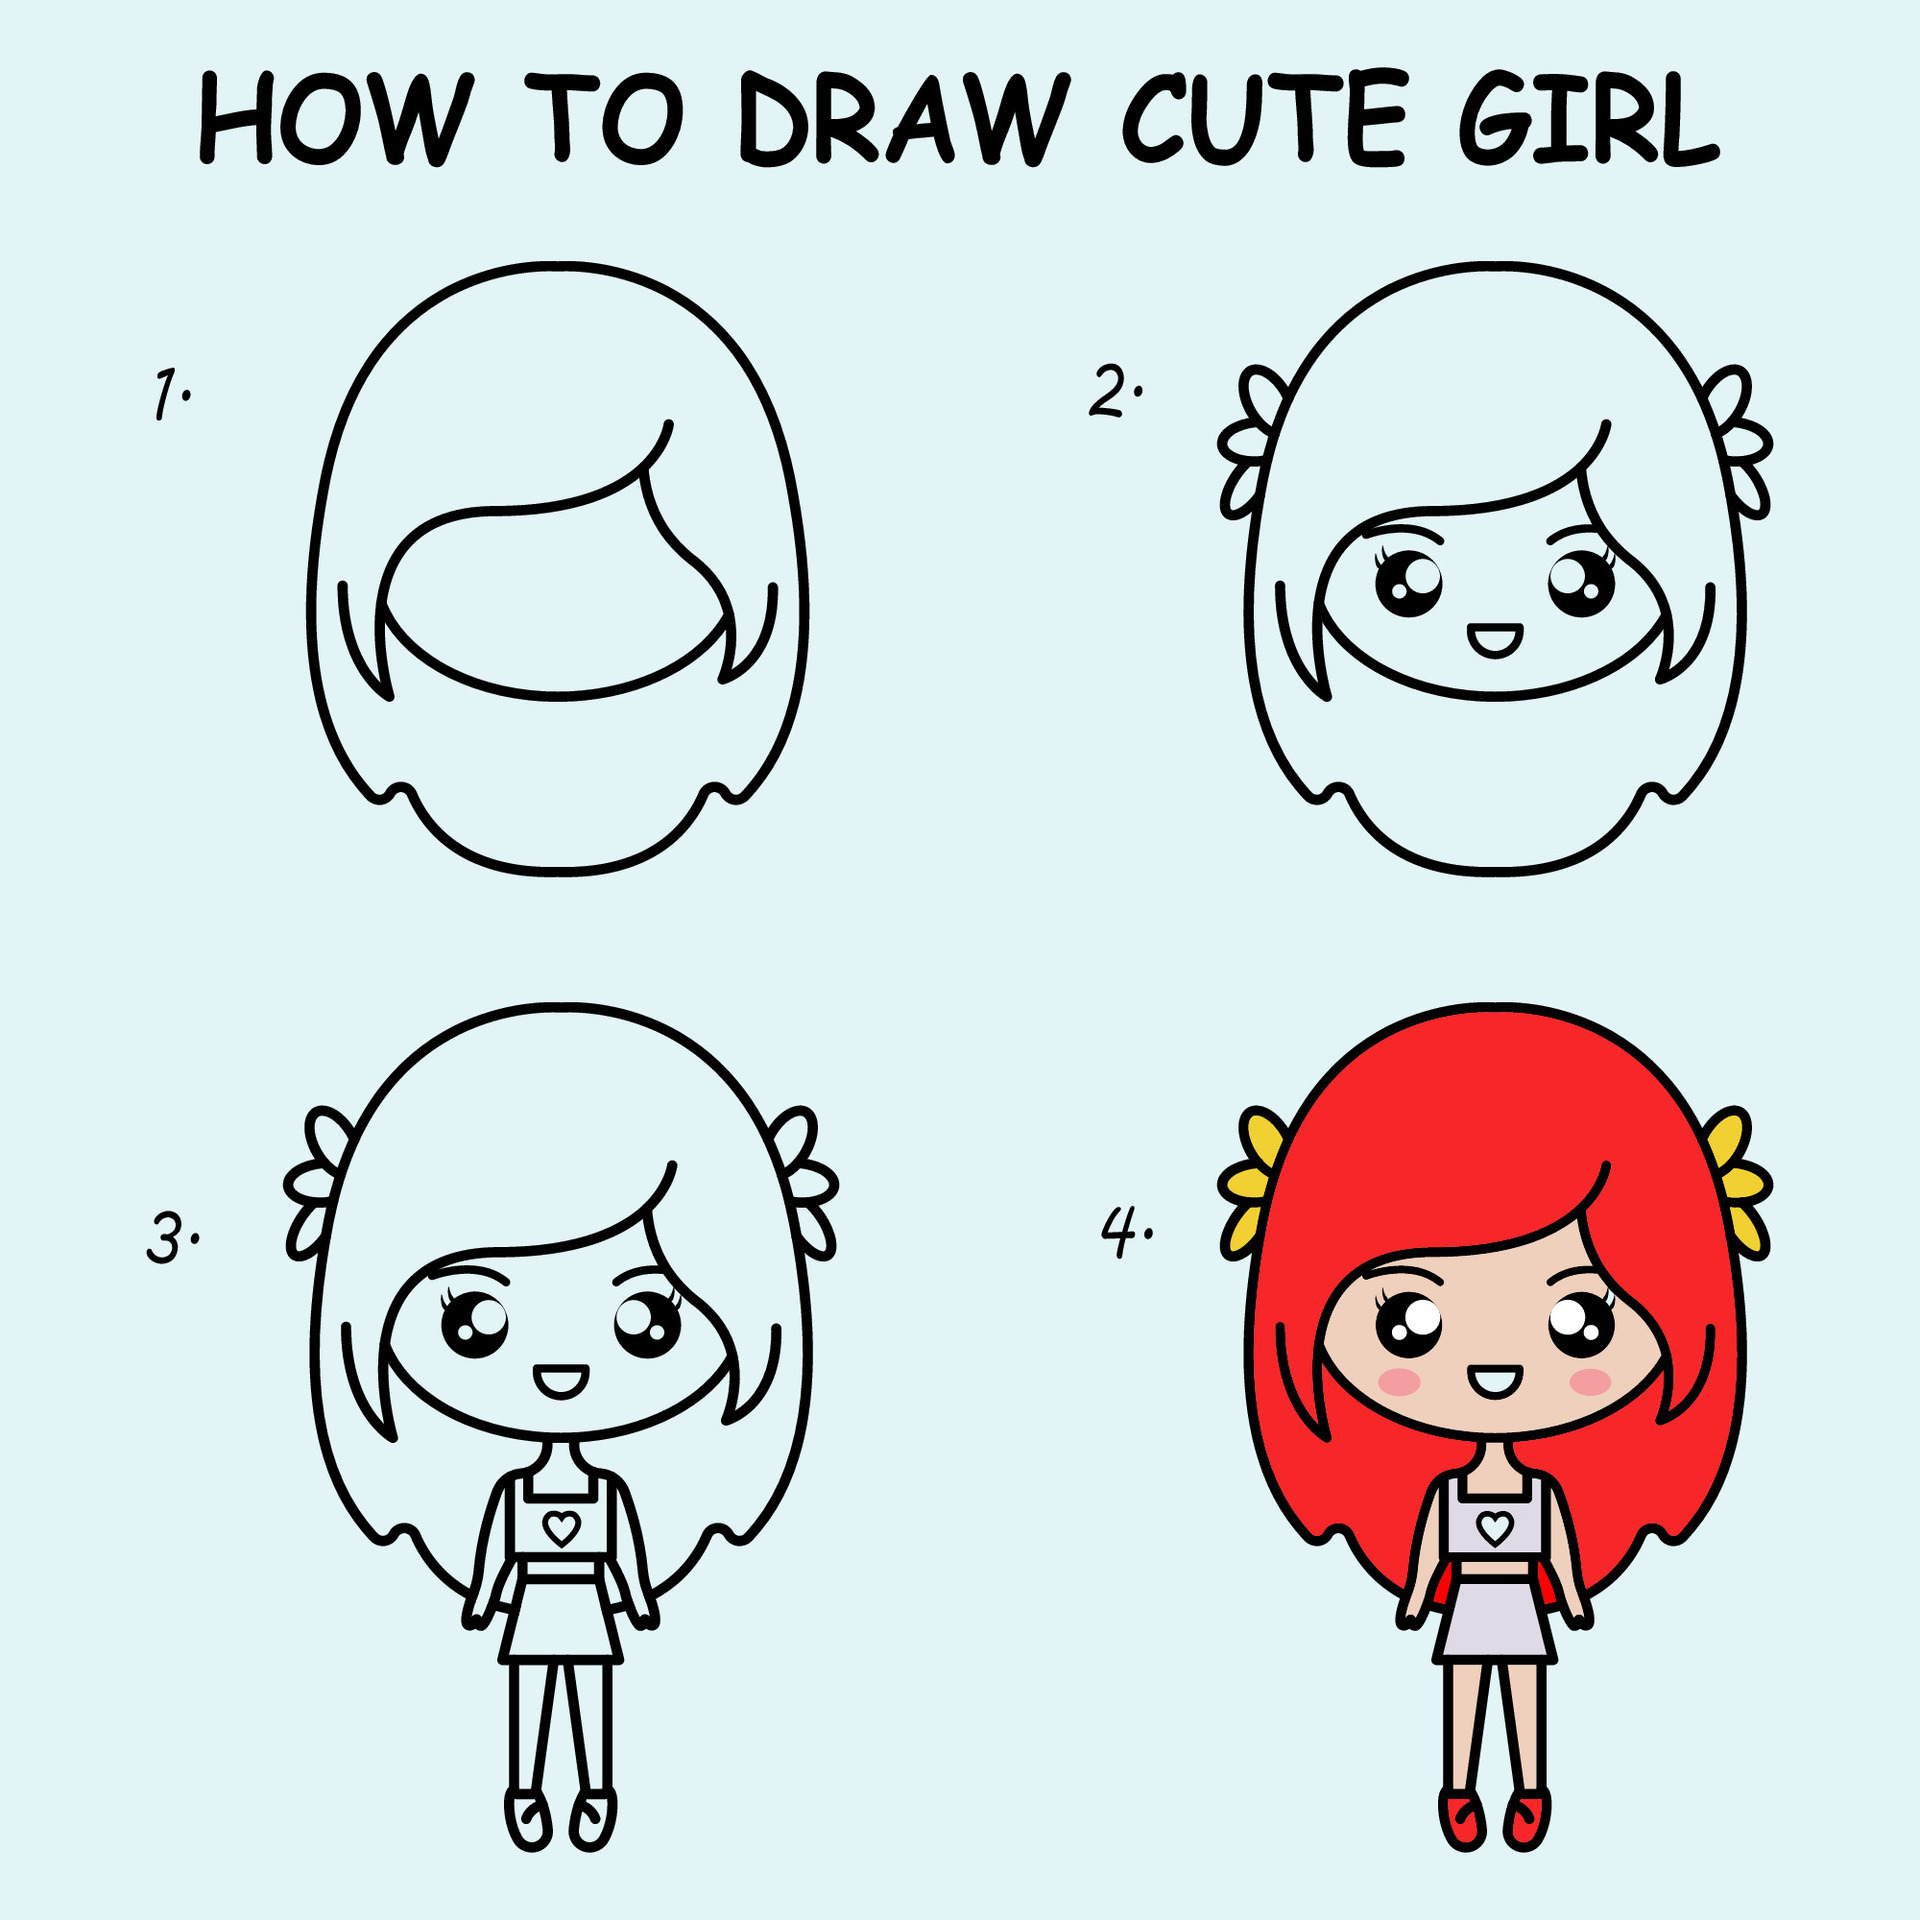 Cute girl drawing, Girl drawing easy step by step